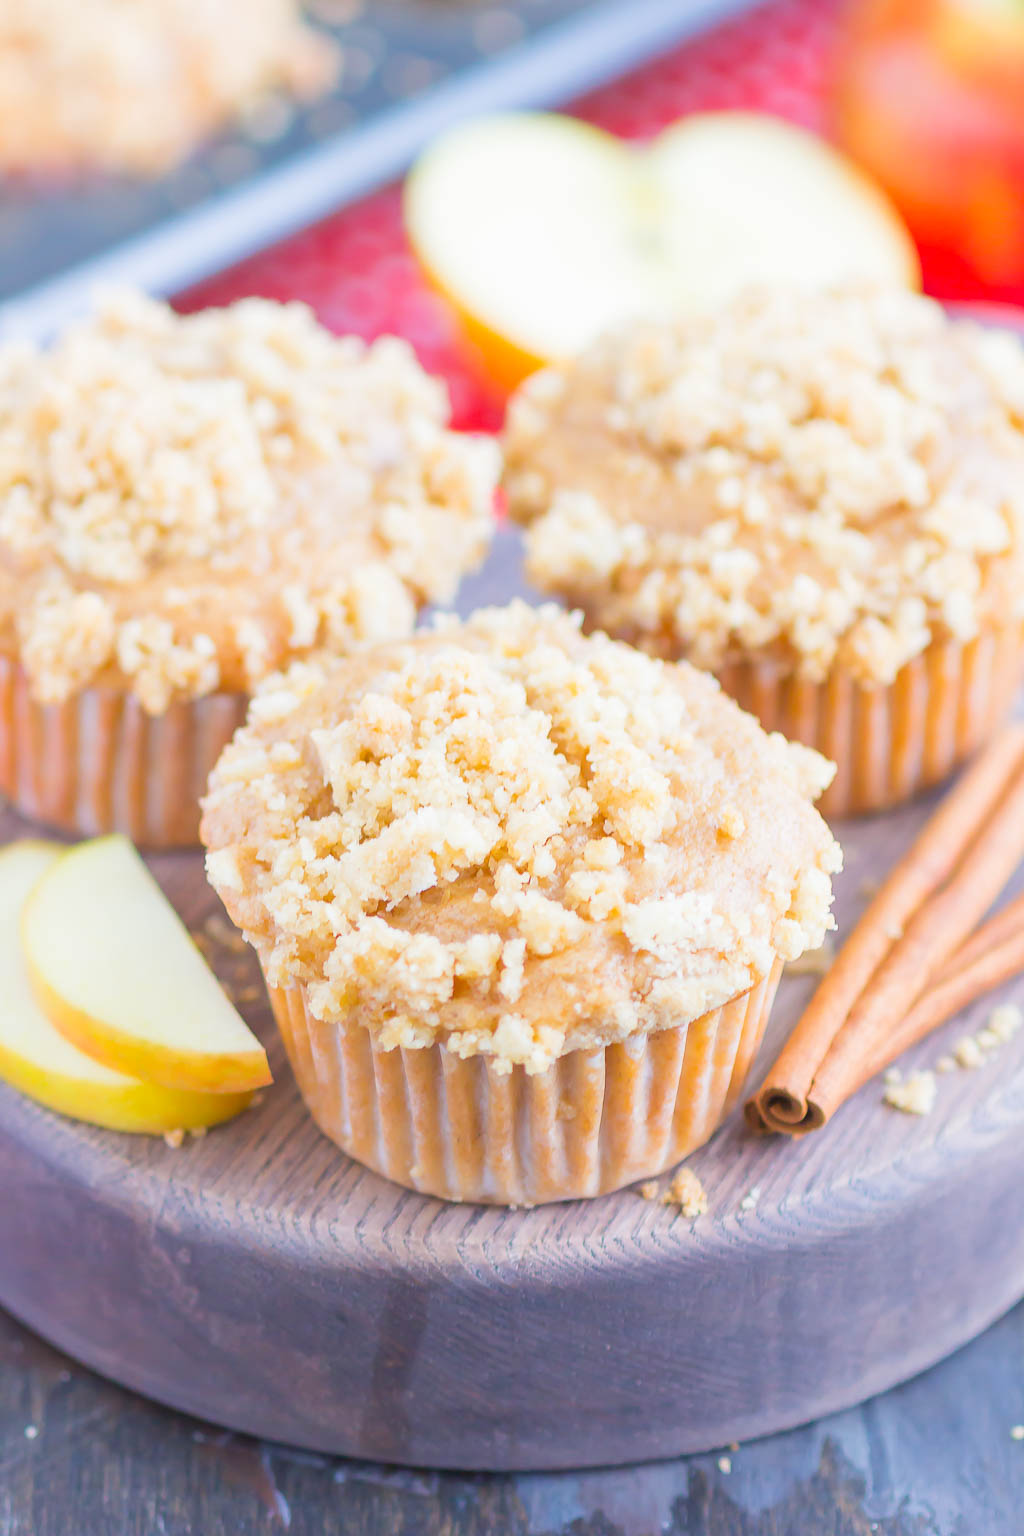 three apple streusel muffins  on a wood tray with cinnamon sticks and apple slices 